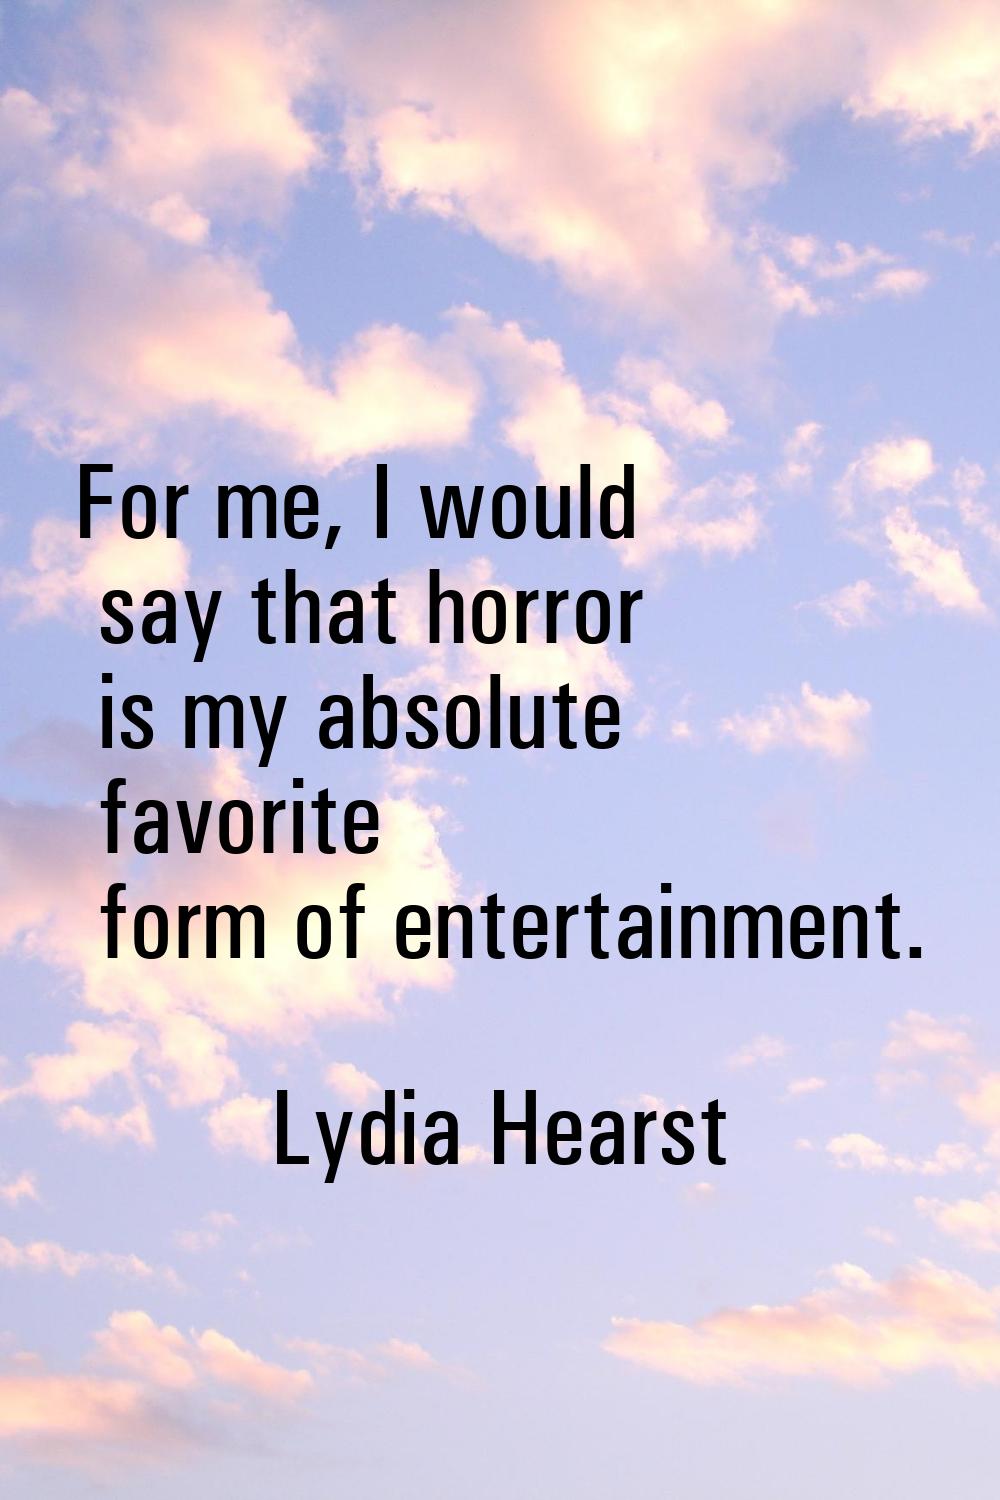 For me, I would say that horror is my absolute favorite form of entertainment.